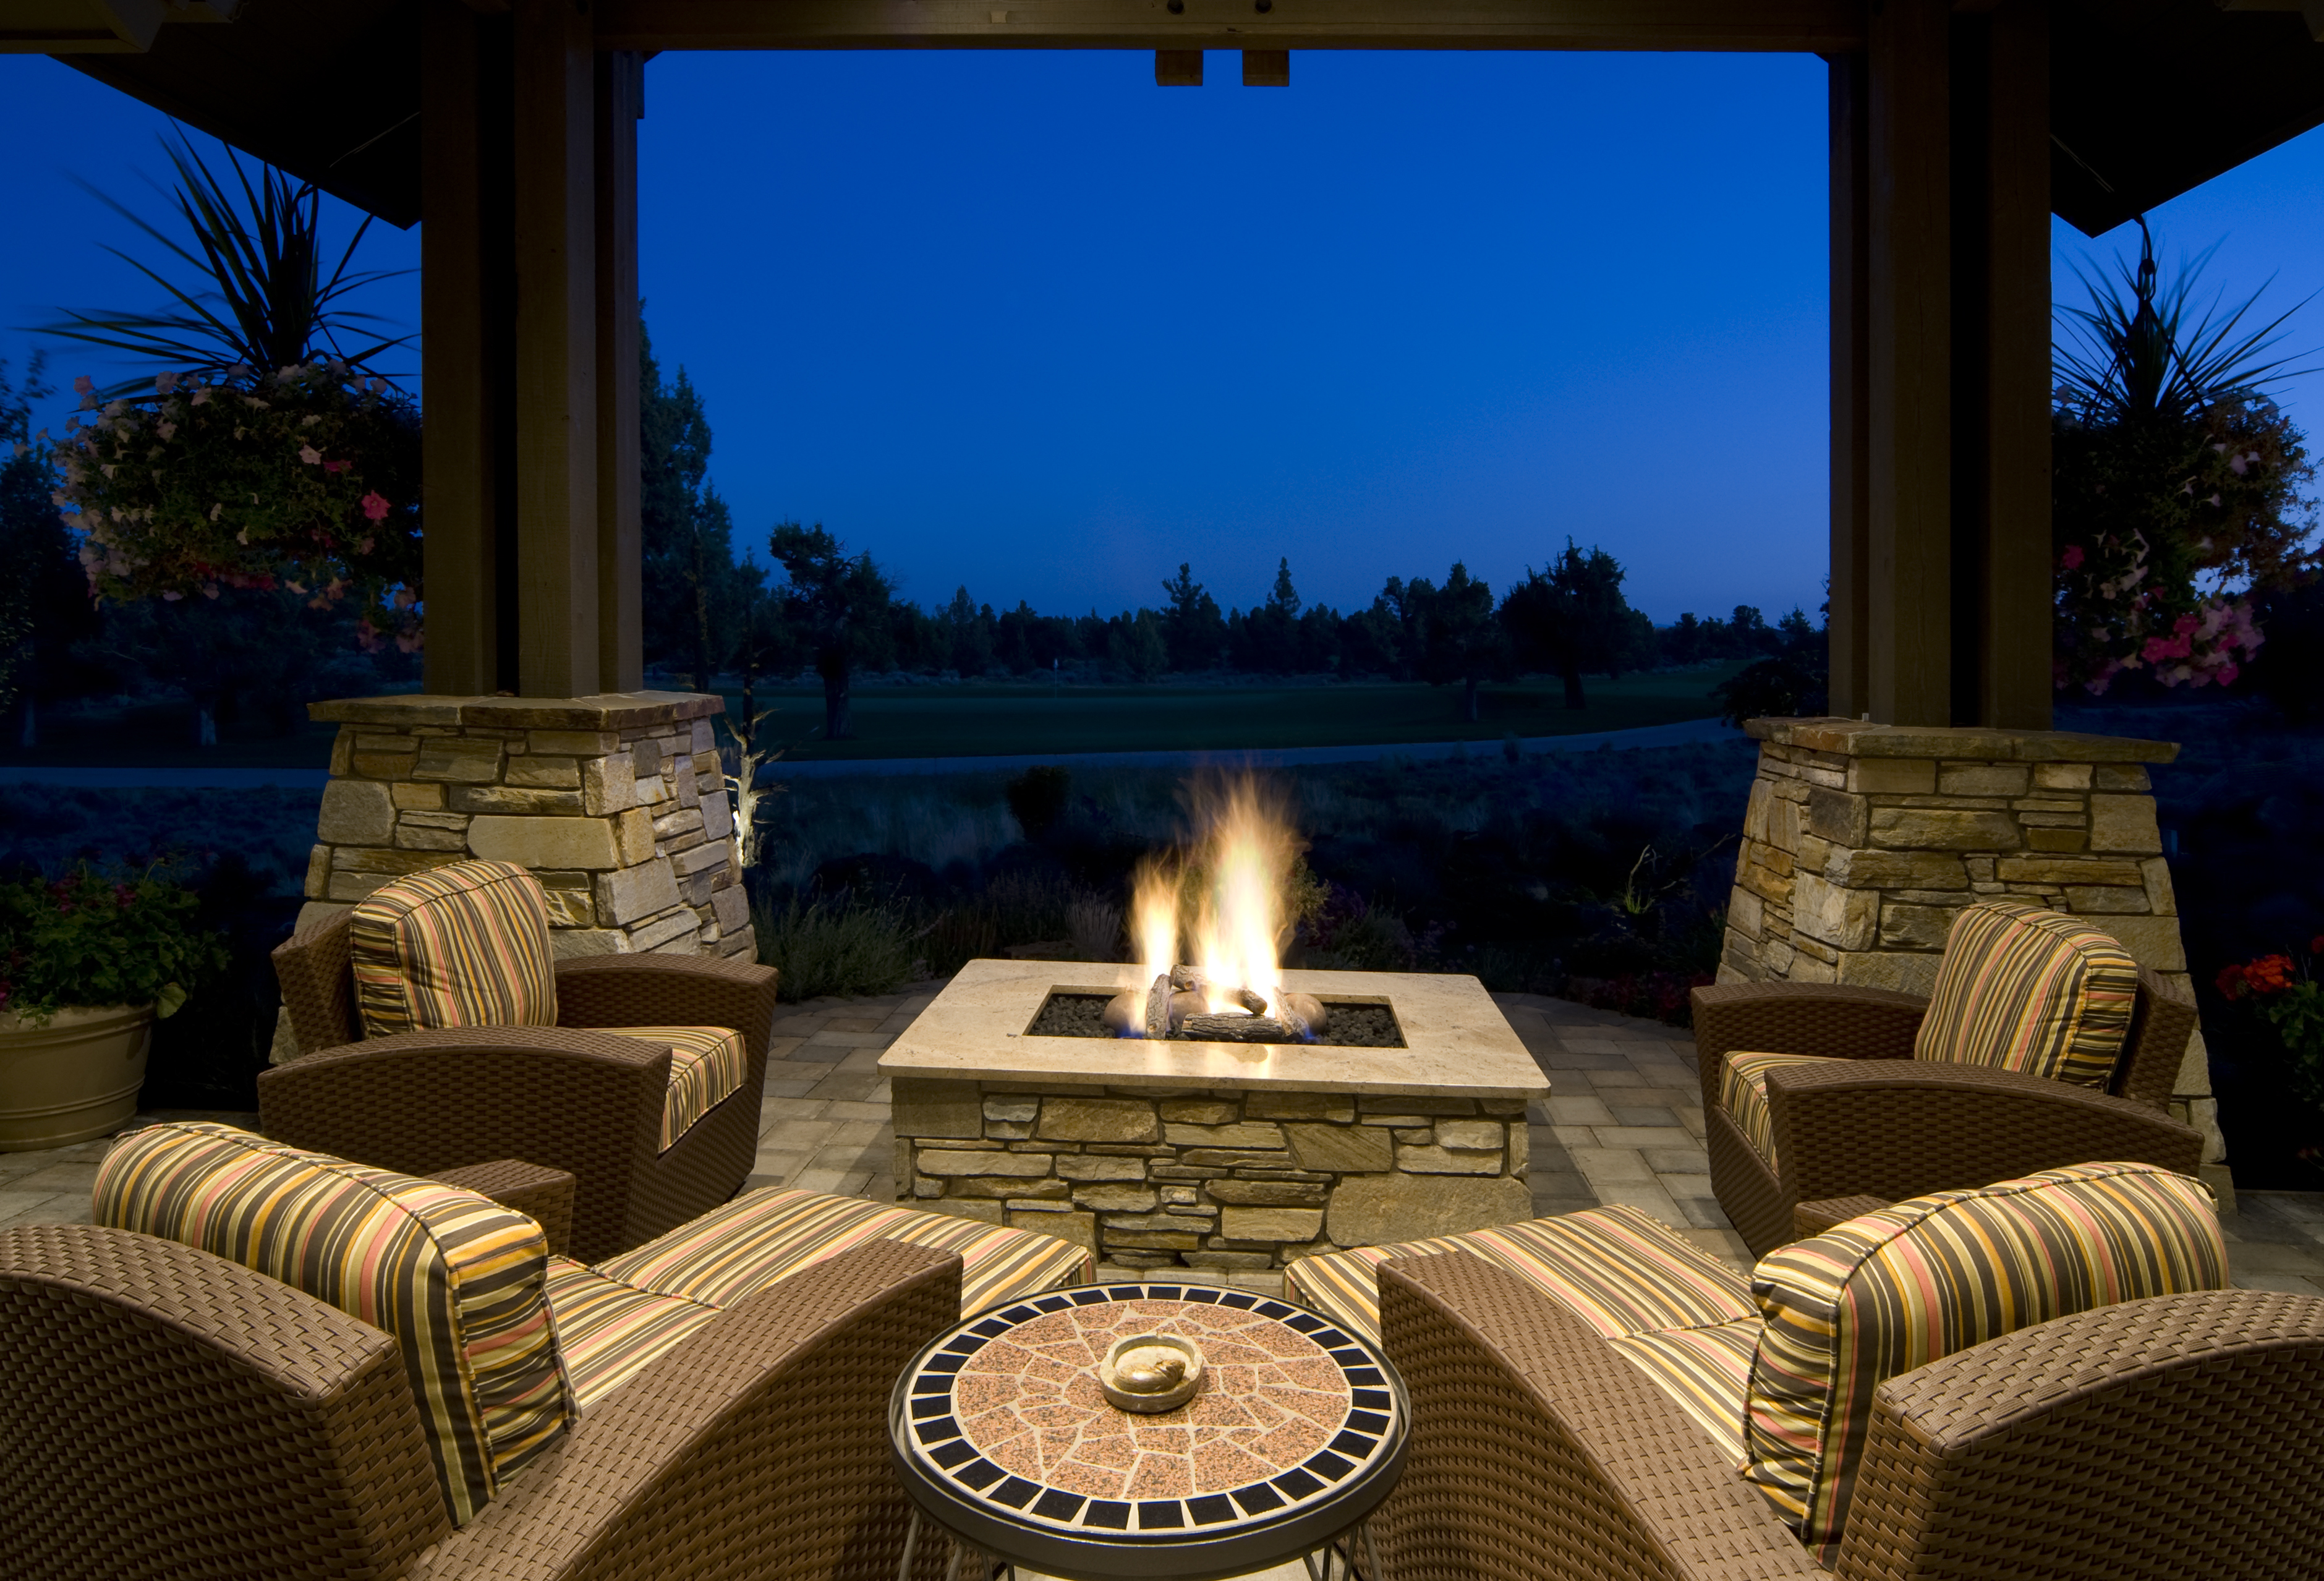 With a new home from Singh and your personal touch, you can enjoy your patio and outdoor space all year long.